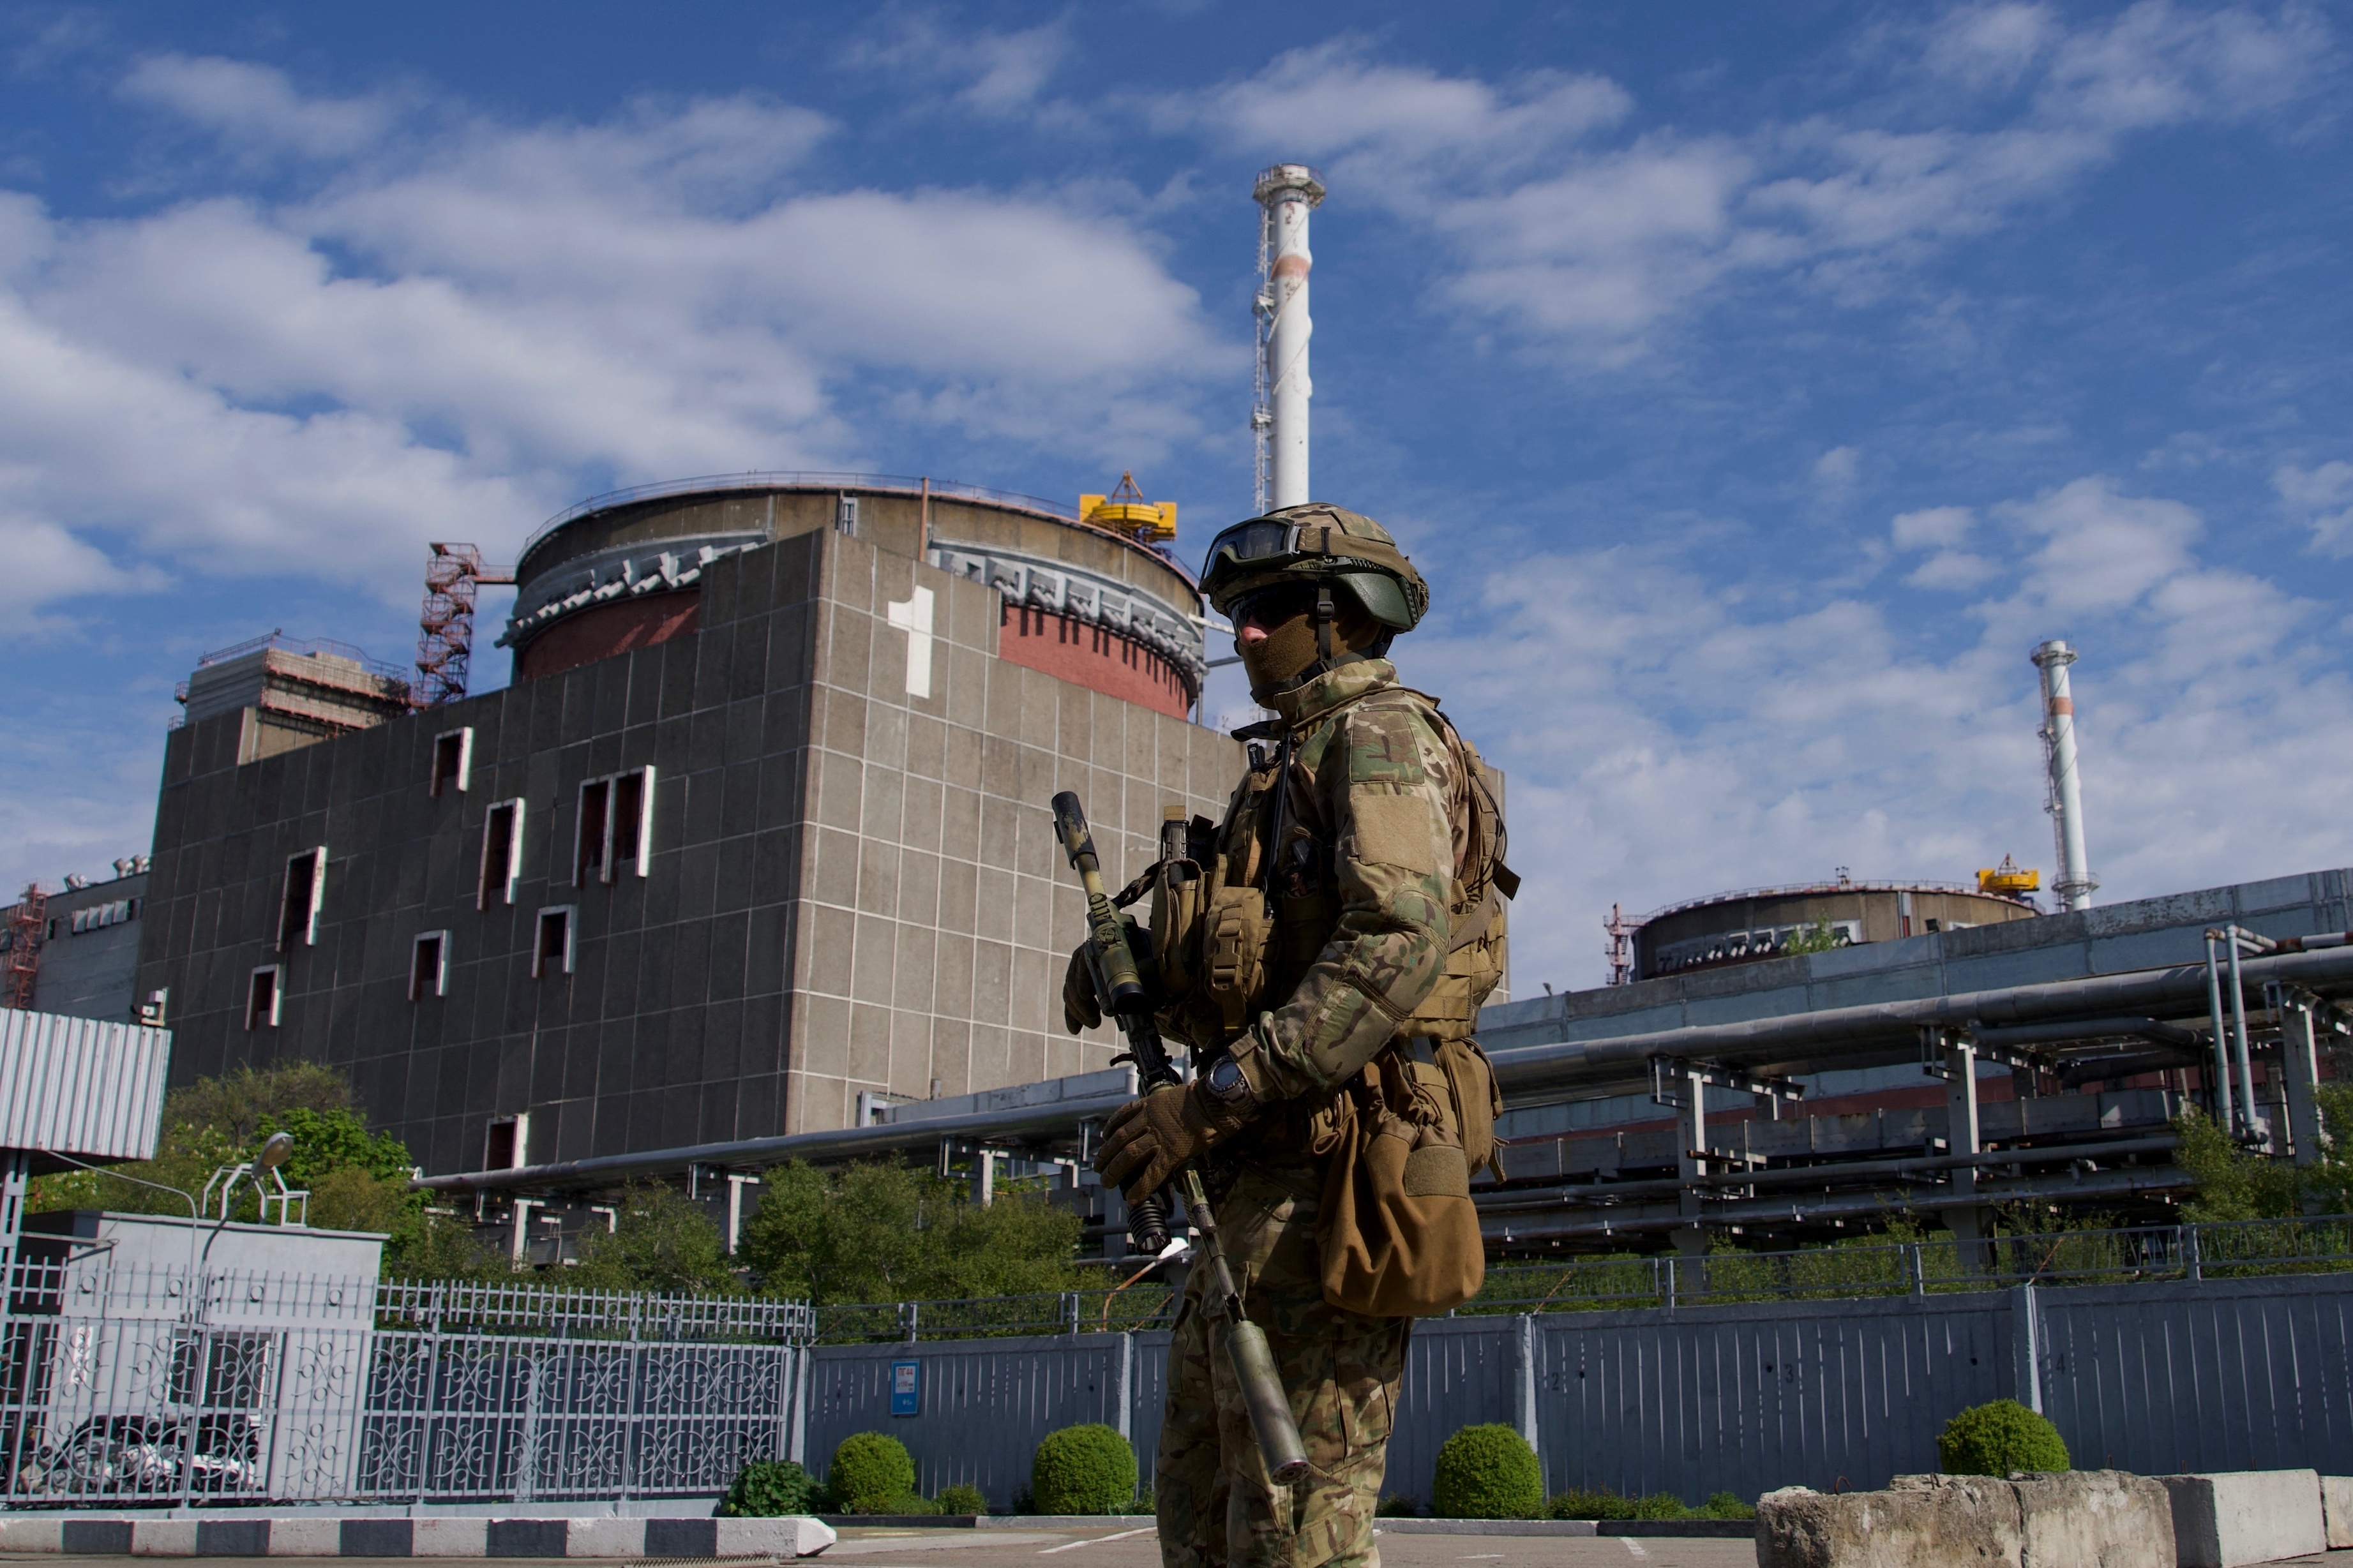 Russian soldier at Zaporizhzhia nuclear power plant